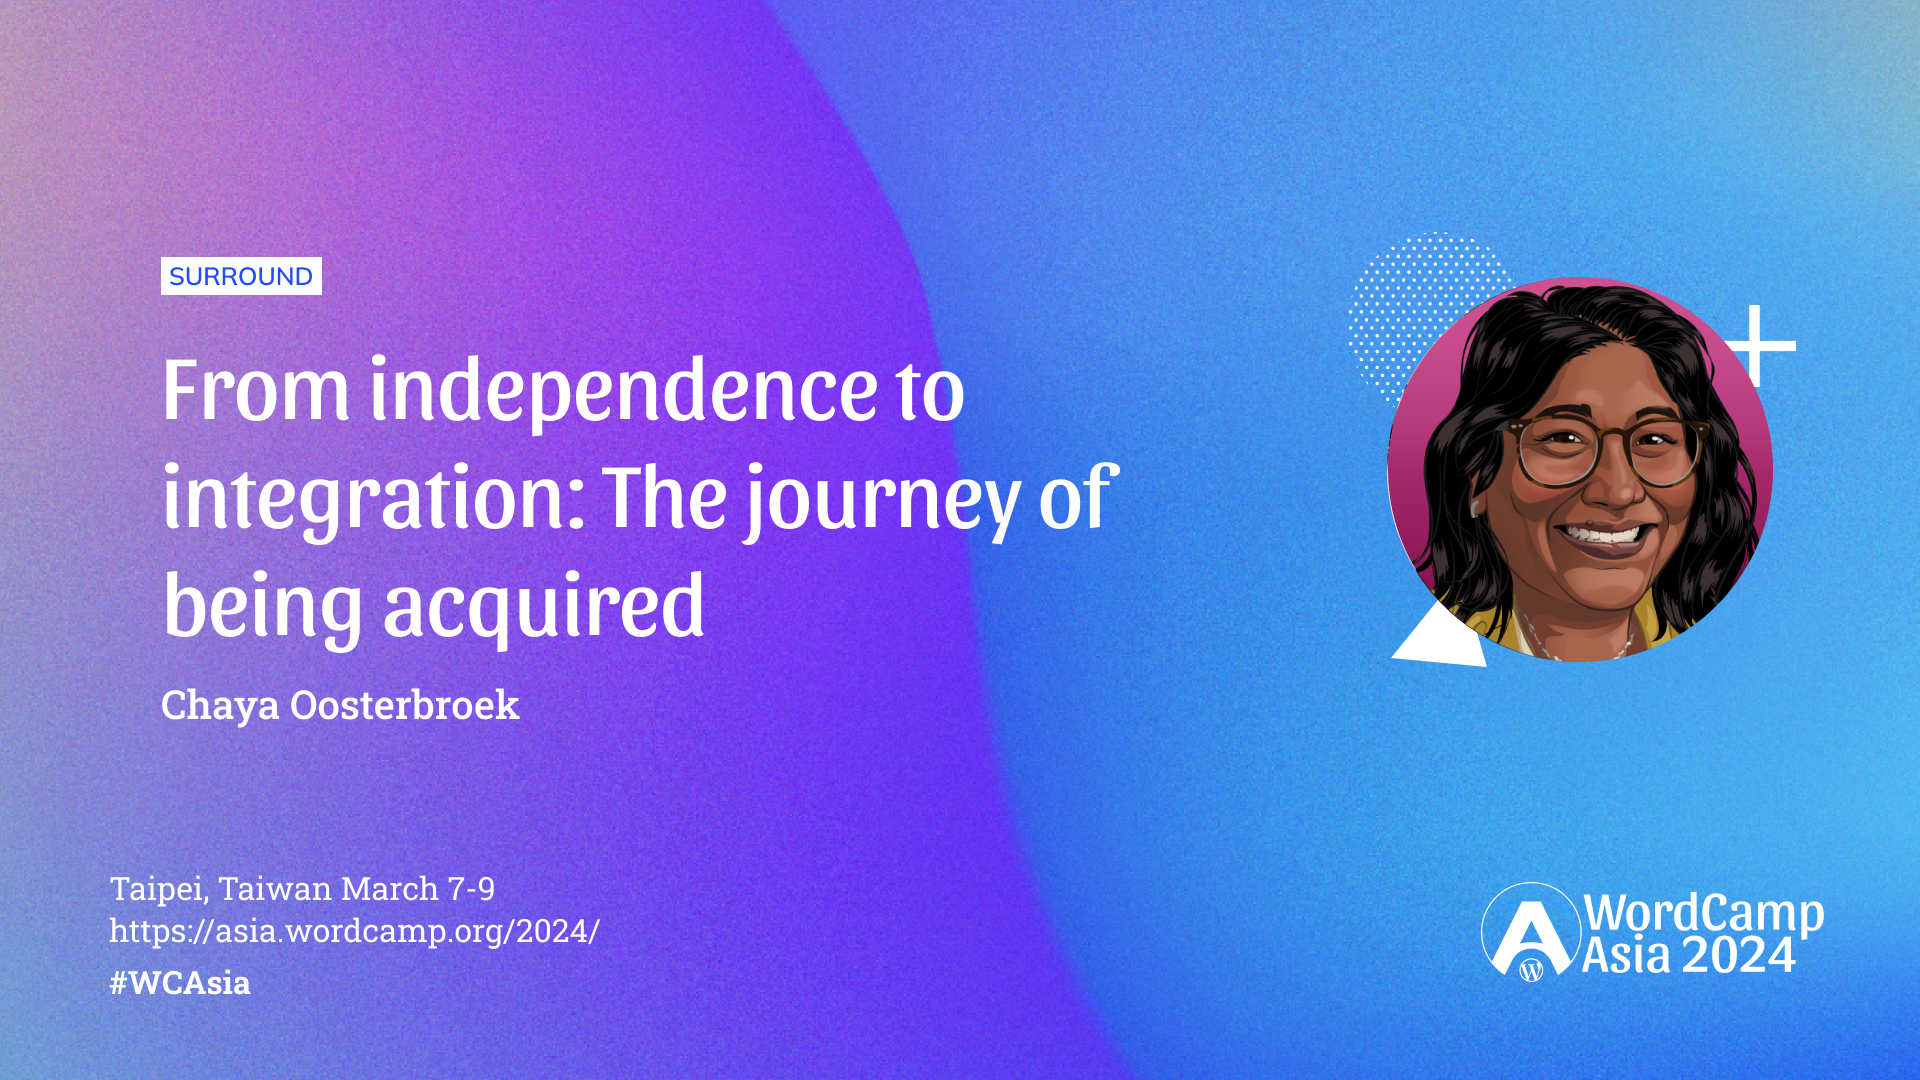 From independence to integration: The journey of being acquired